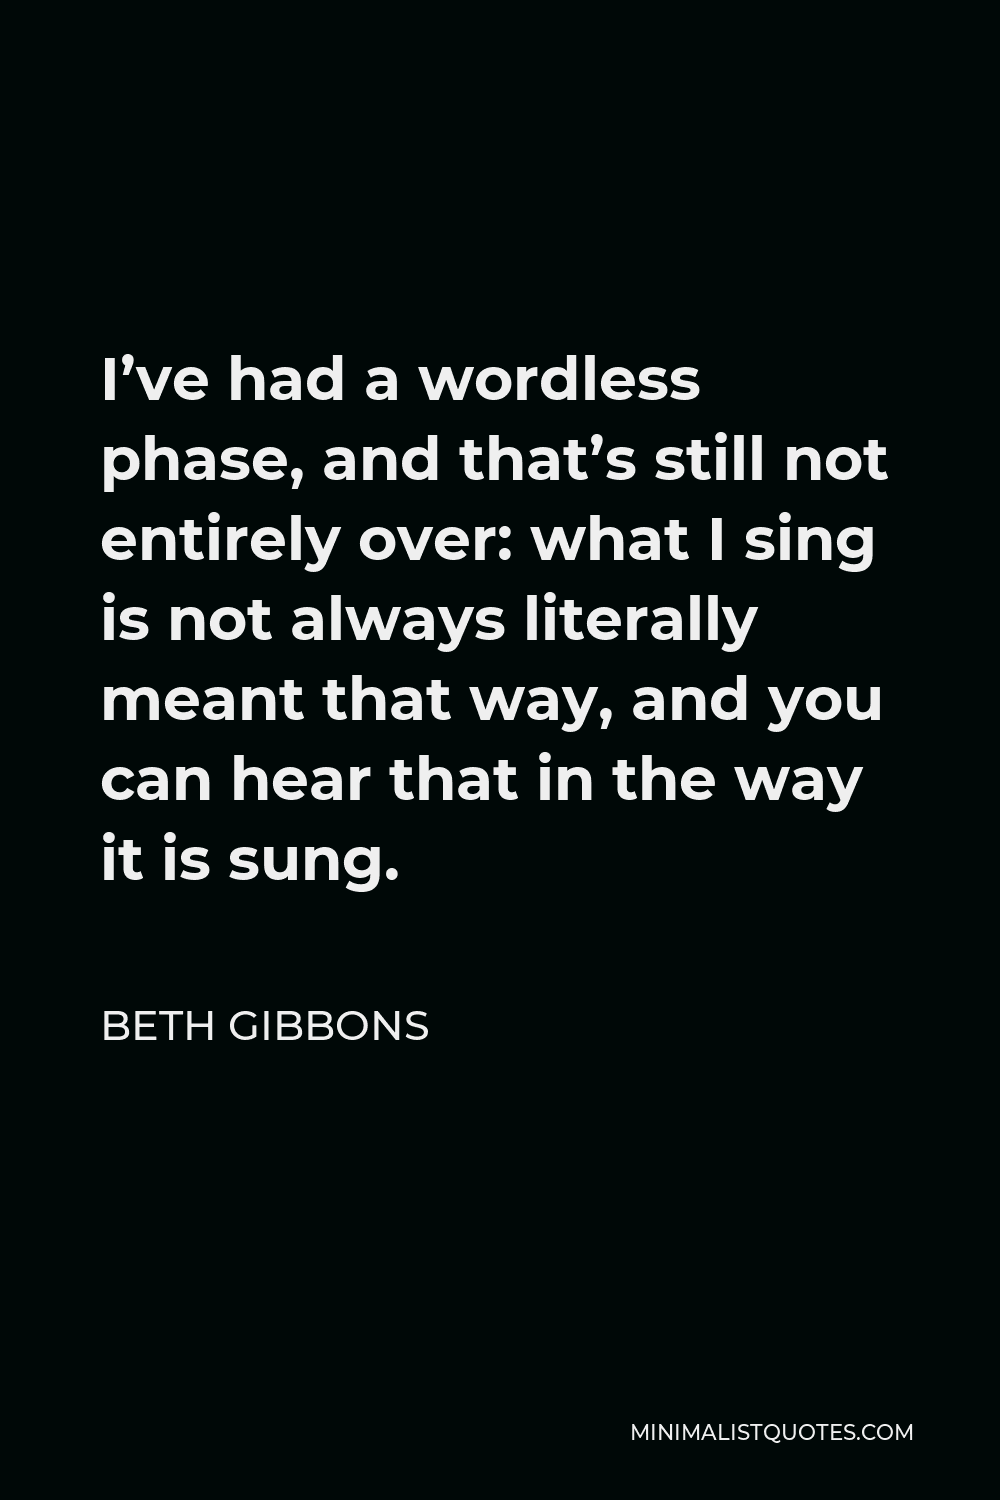 Beth Gibbons Quote - I’ve had a wordless phase, and that’s still not entirely over: what I sing is not always literally meant that way, and you can hear that in the way it is sung.